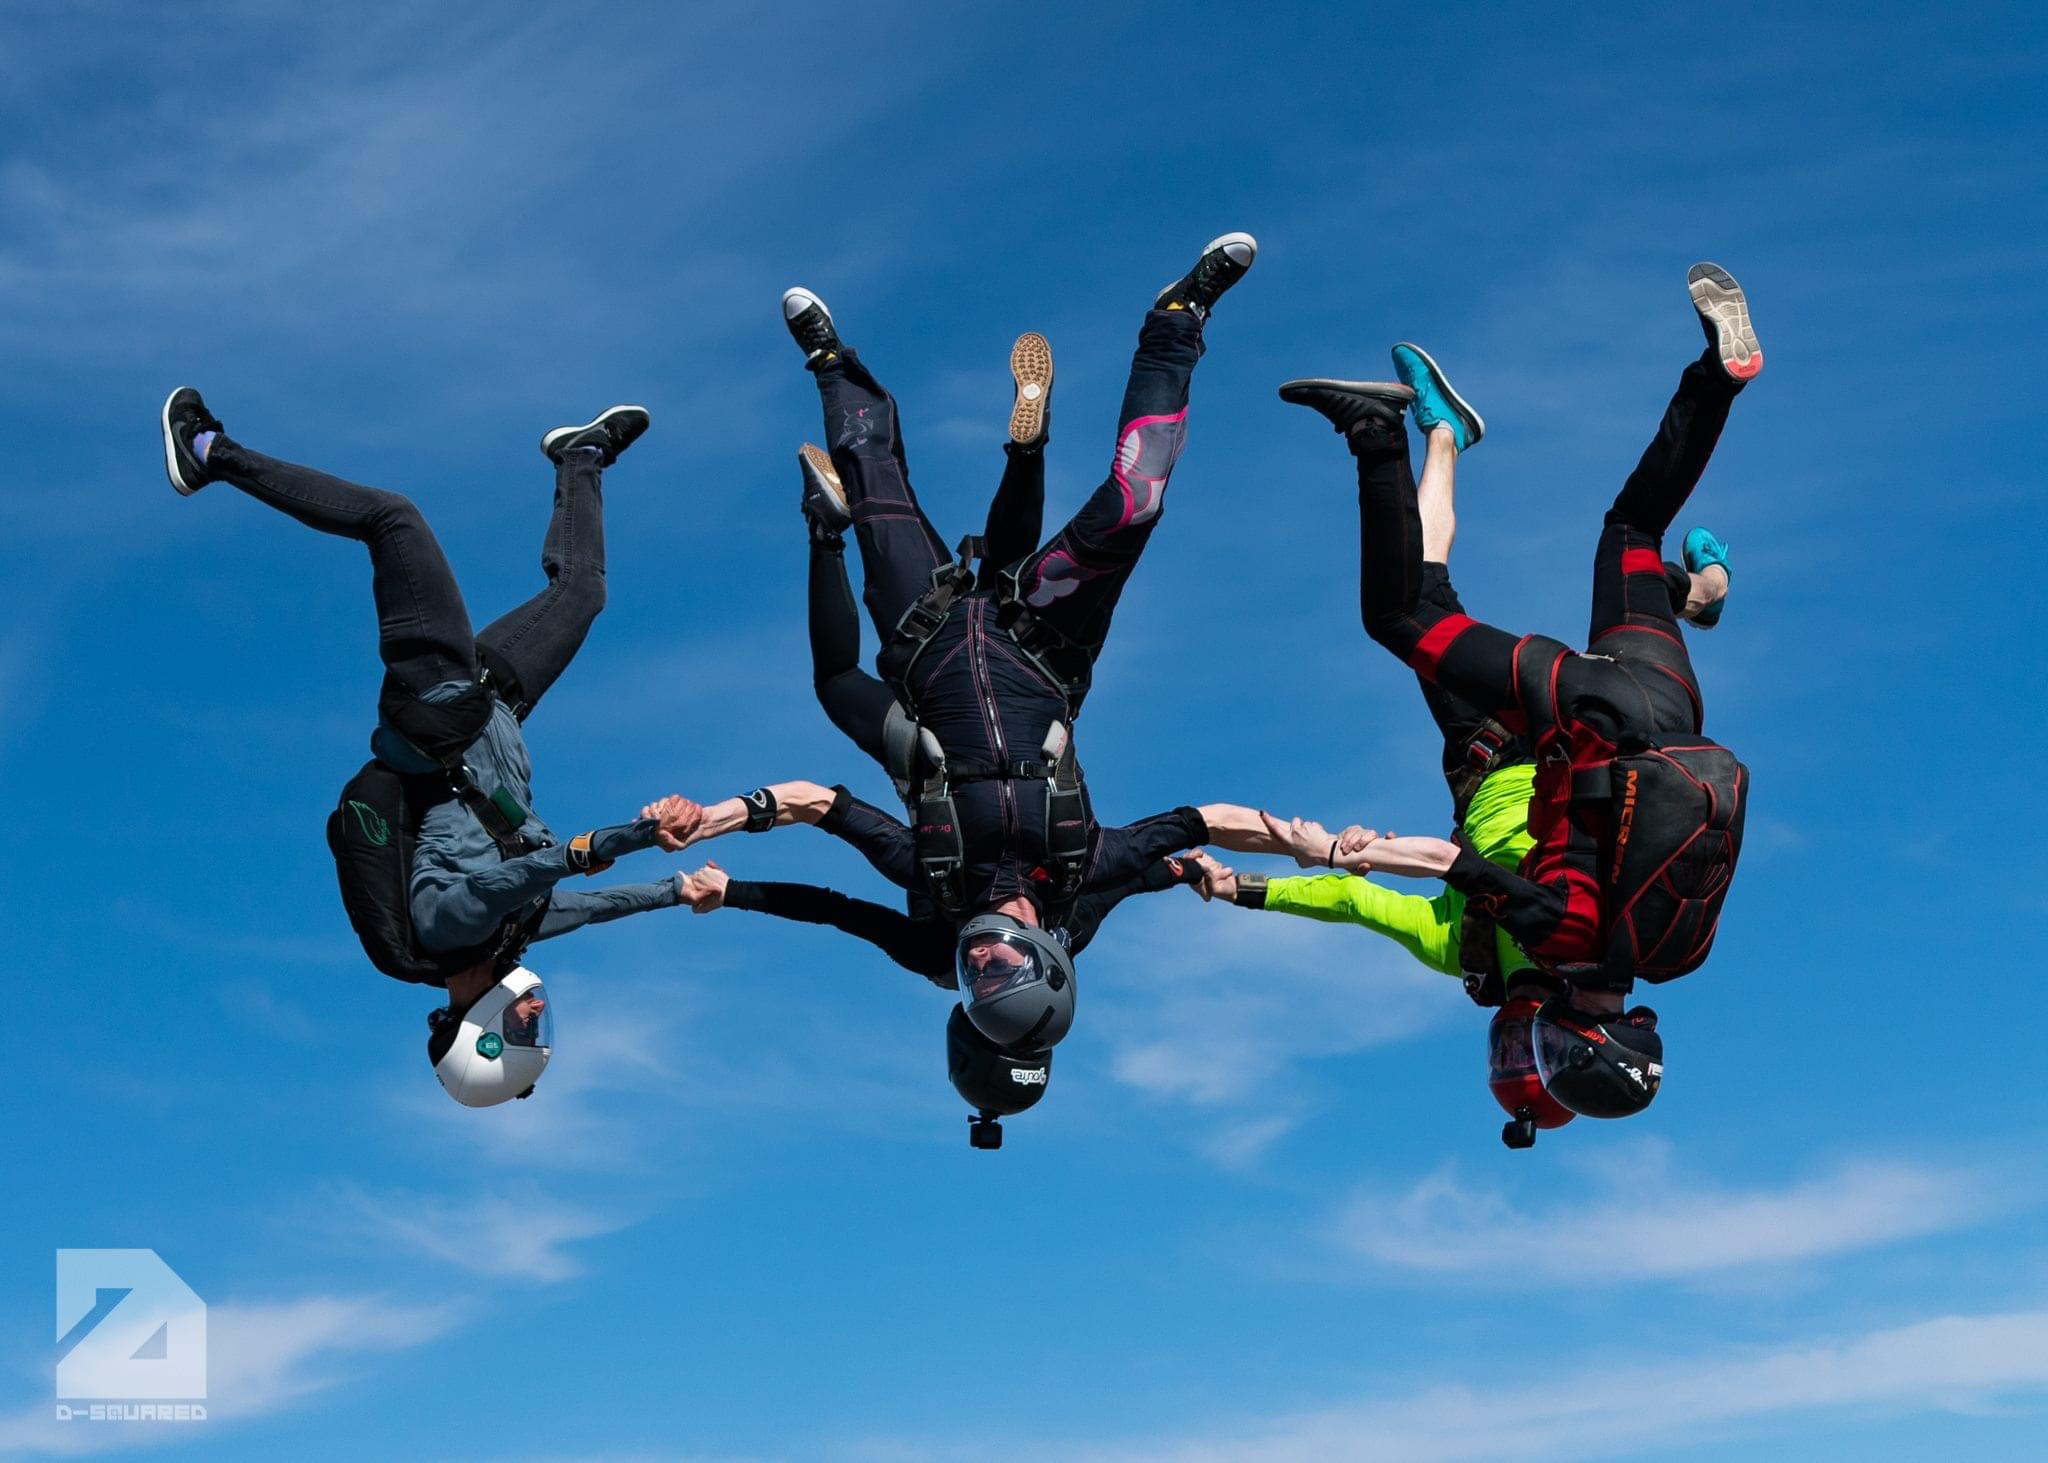 Jennifer Bocker, the new chief medical officer at HCA Florida Sarasota Doctors Hospital, is a skydiver who has done thousands of jumps. (Courtesy of HCA Florida Sarasota Doctors Hospital.)